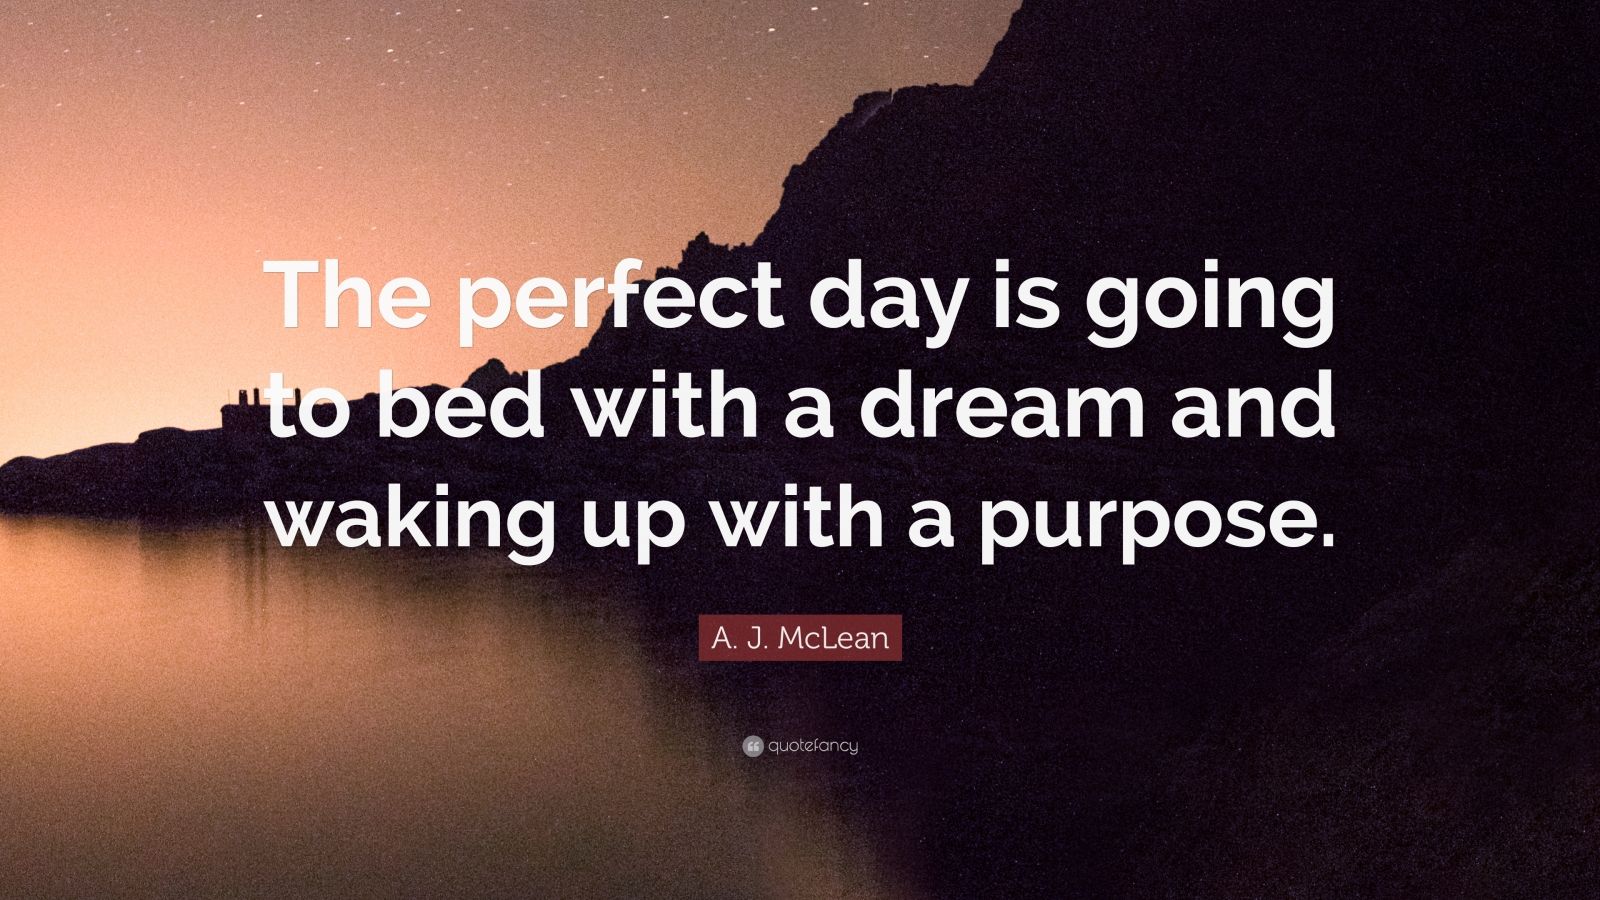 A. J. McLean Quote: “The perfect day is going to bed with a dream and